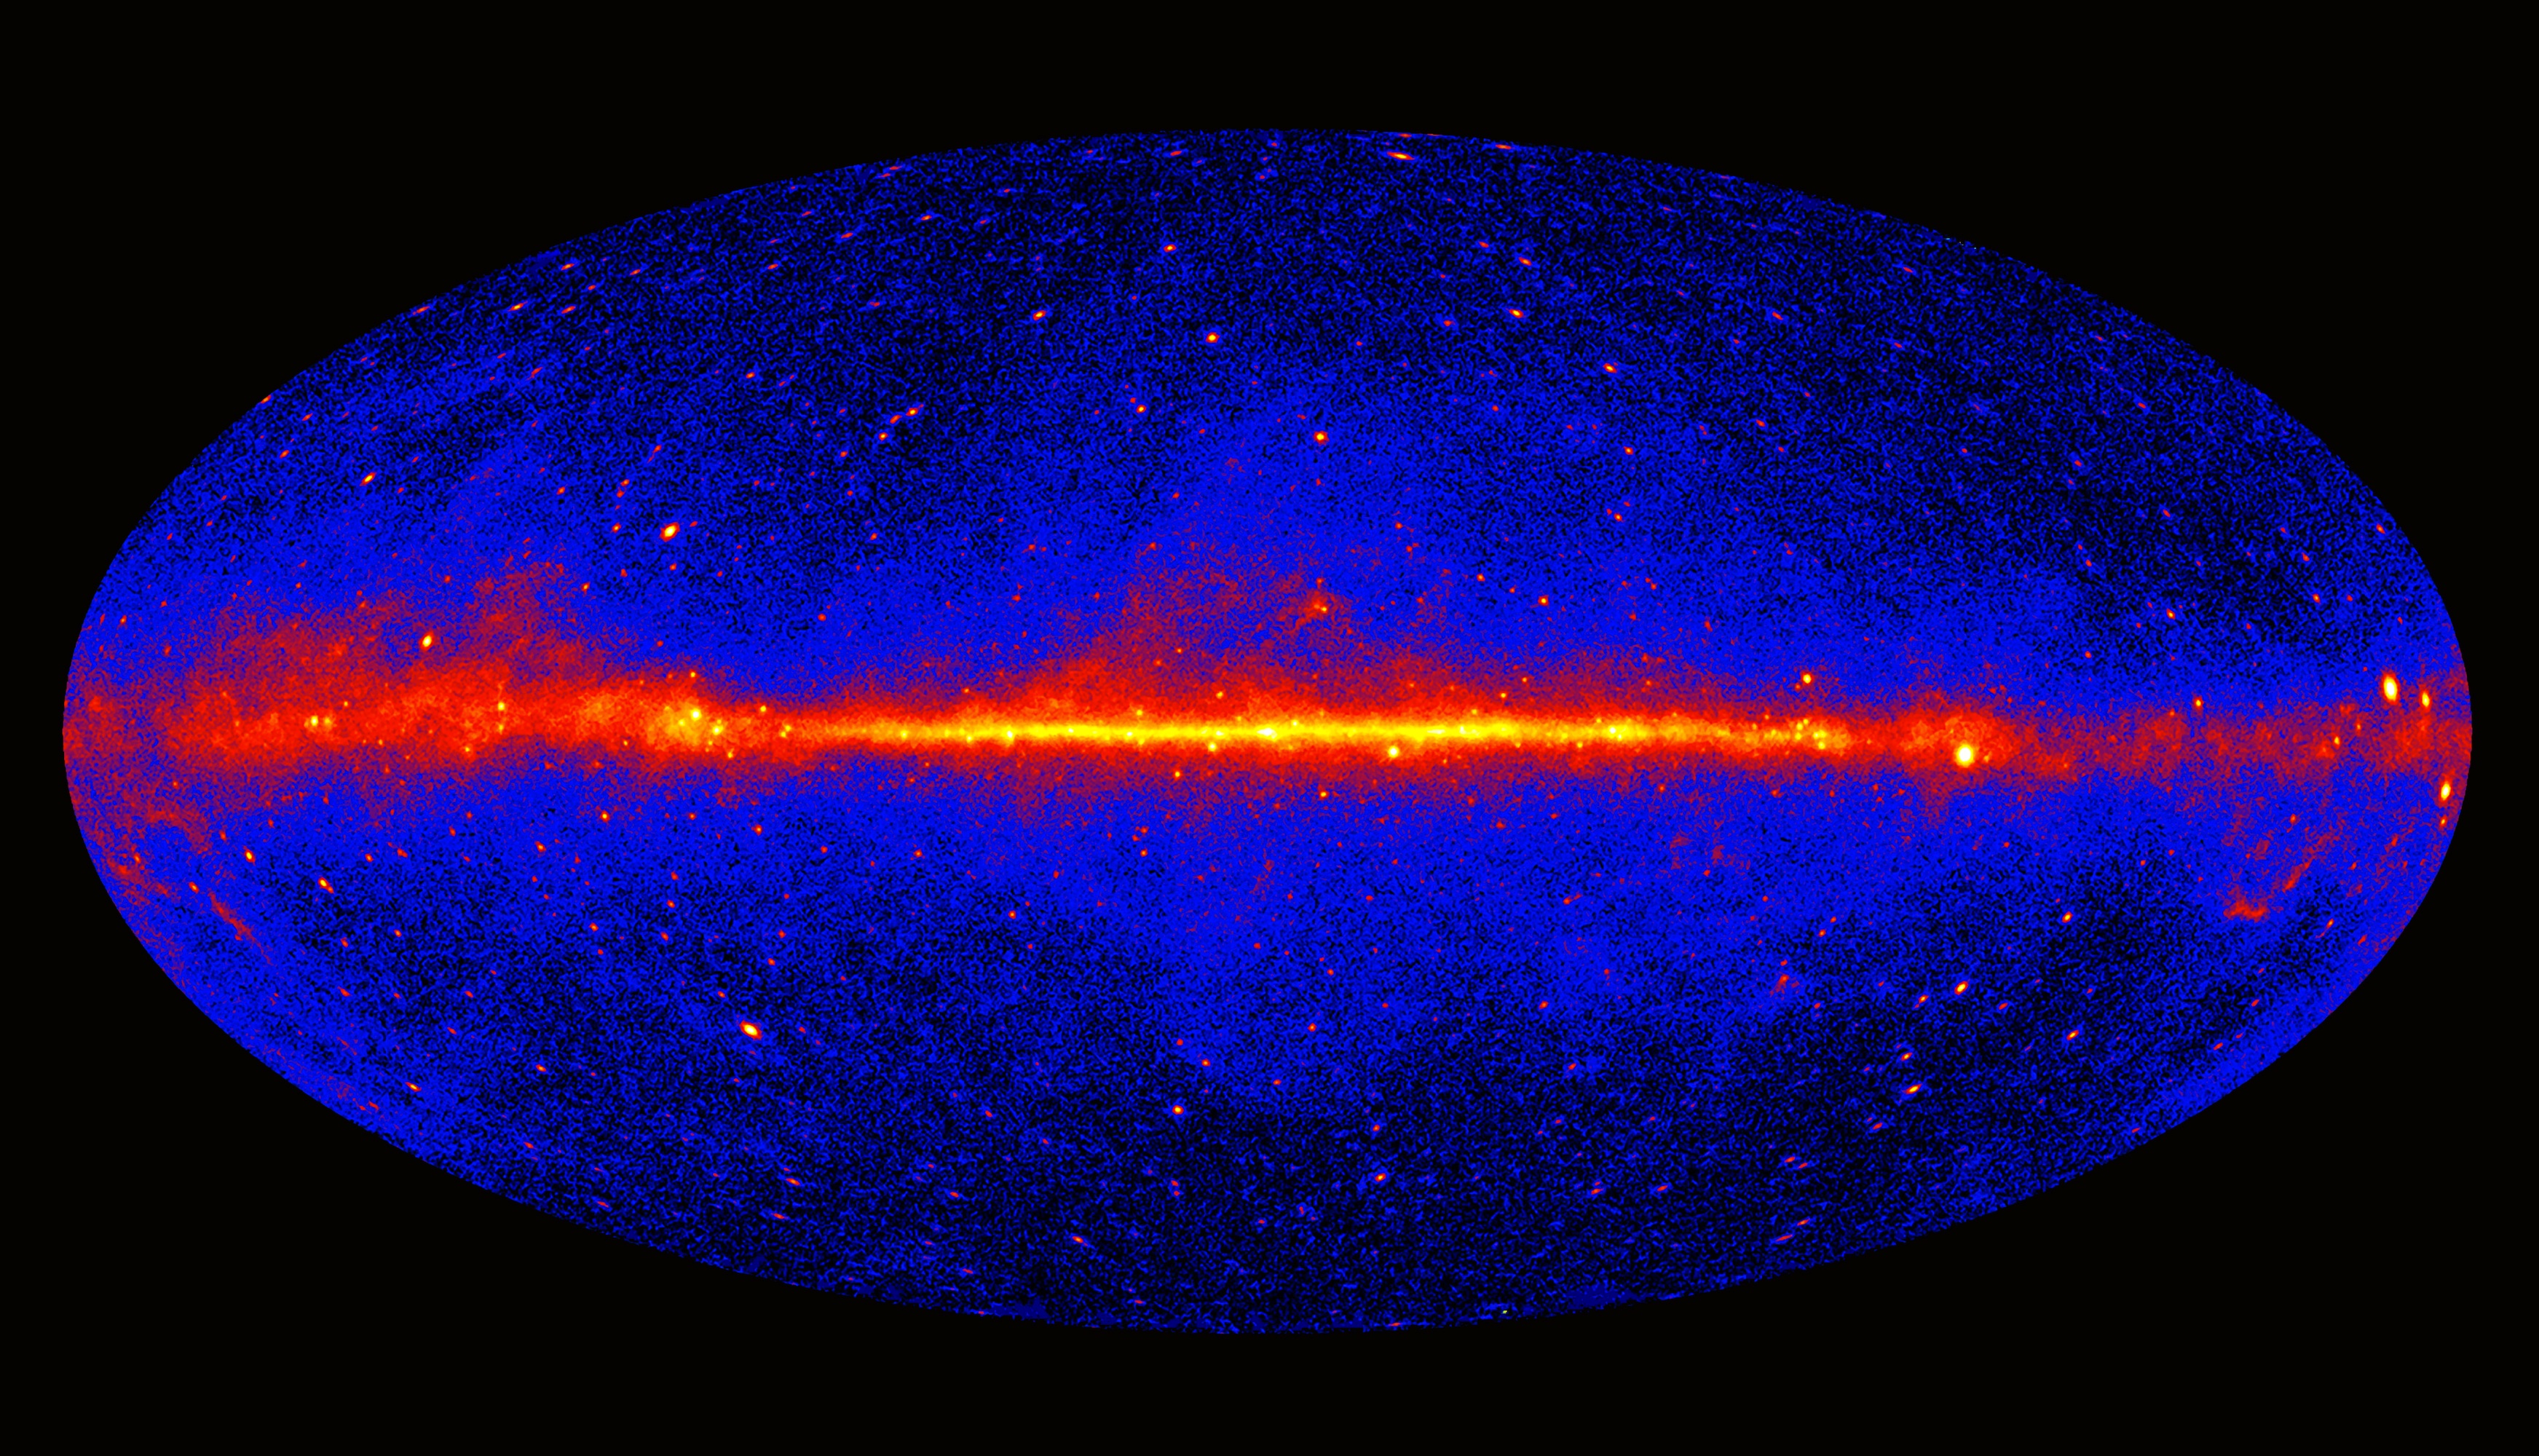 Fermi's view of the gamma-ray sky continually improves. This image of the entire sky includes three years of observations by Fermi's Large Area Telescope (LAT). It shows how the sky appears at energies greater than 1 billion electron volts (1 GeV). Brighter colors indicate brighter gamma-ray sources. A diffuse glow fills the sky and is brightest along the plane of our galaxy (middle). Discrete gamma-ray sources include pulsars and supernova remnants within our galaxy as well as distant galaxies powered by supermassive black holes. Credit: NASA/DOE/Fermi LAT Collaboration